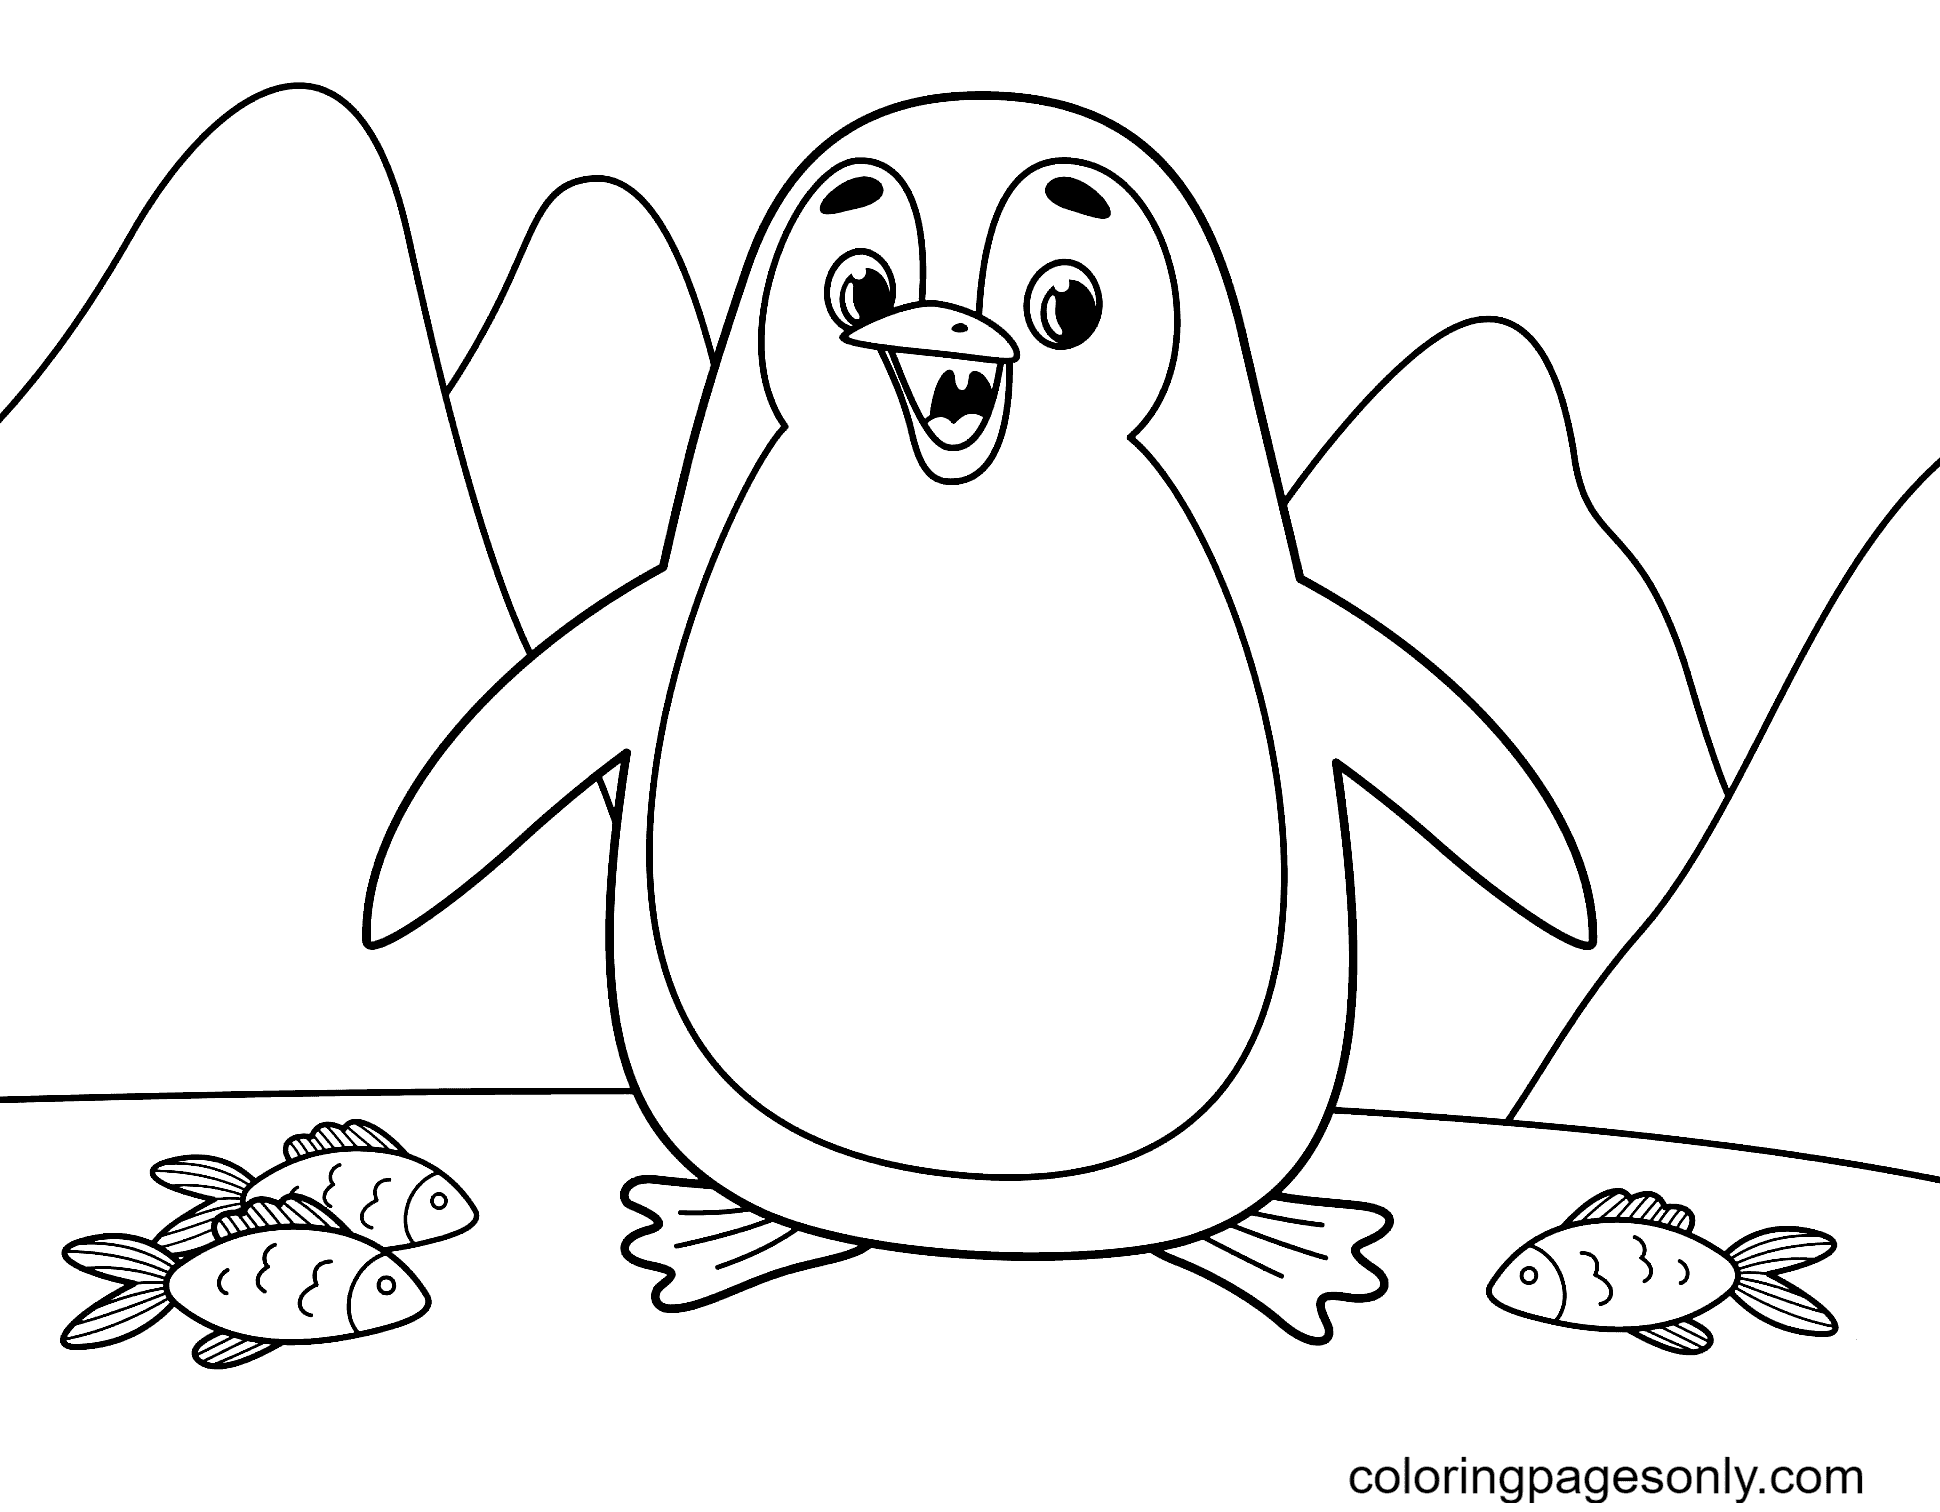 Penguin With Fish Coloring Page